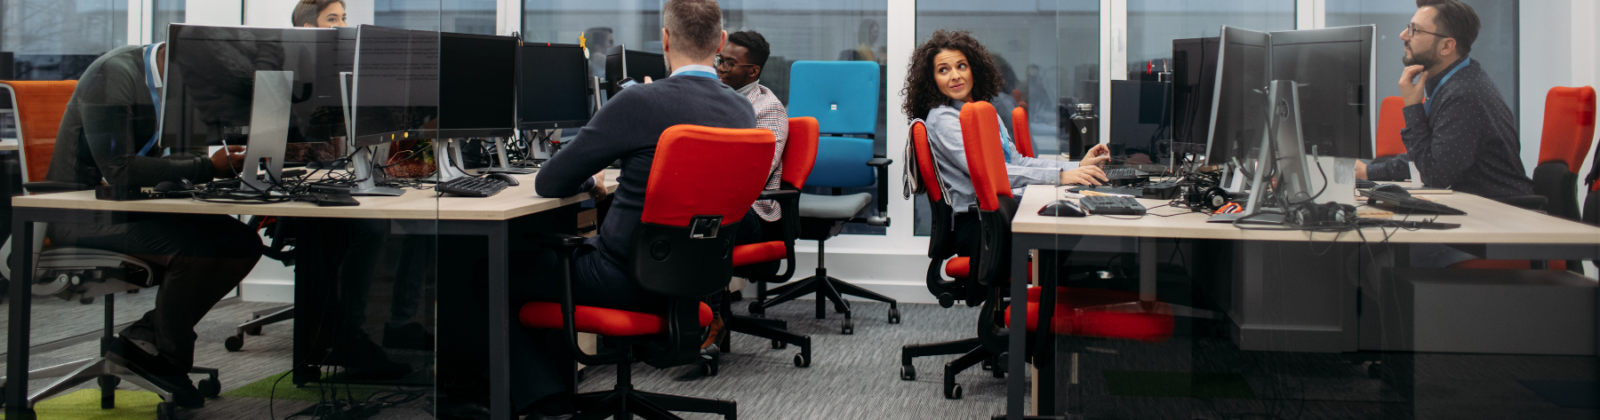 An image of people in an office space with red task chairs and desks